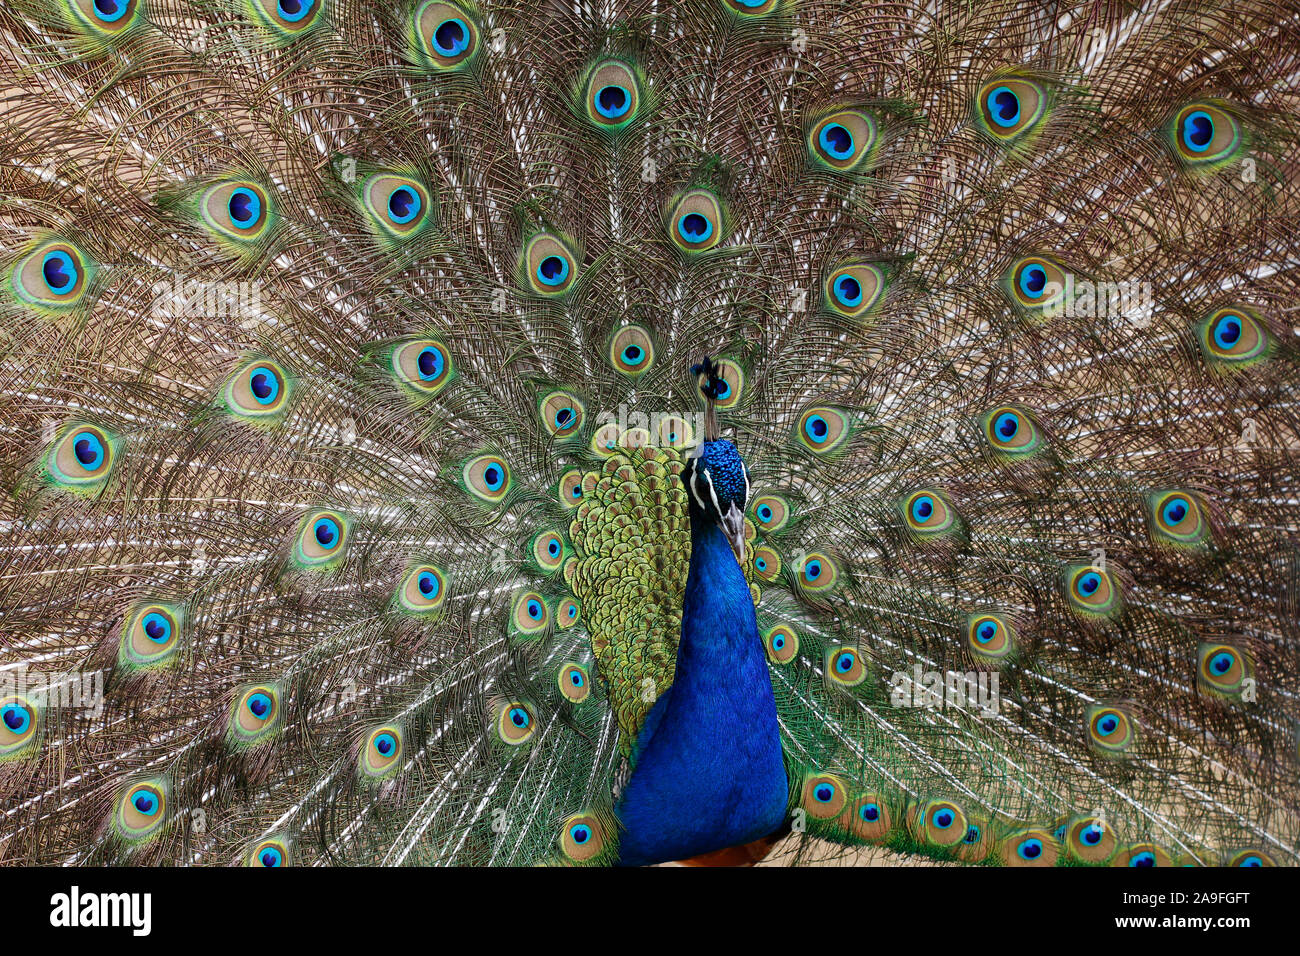 Peacock opened its beautiful tail. Colored feathers on the tail of a peacock. A beautiful male peacock shows off its tail feathers. Stock Photo